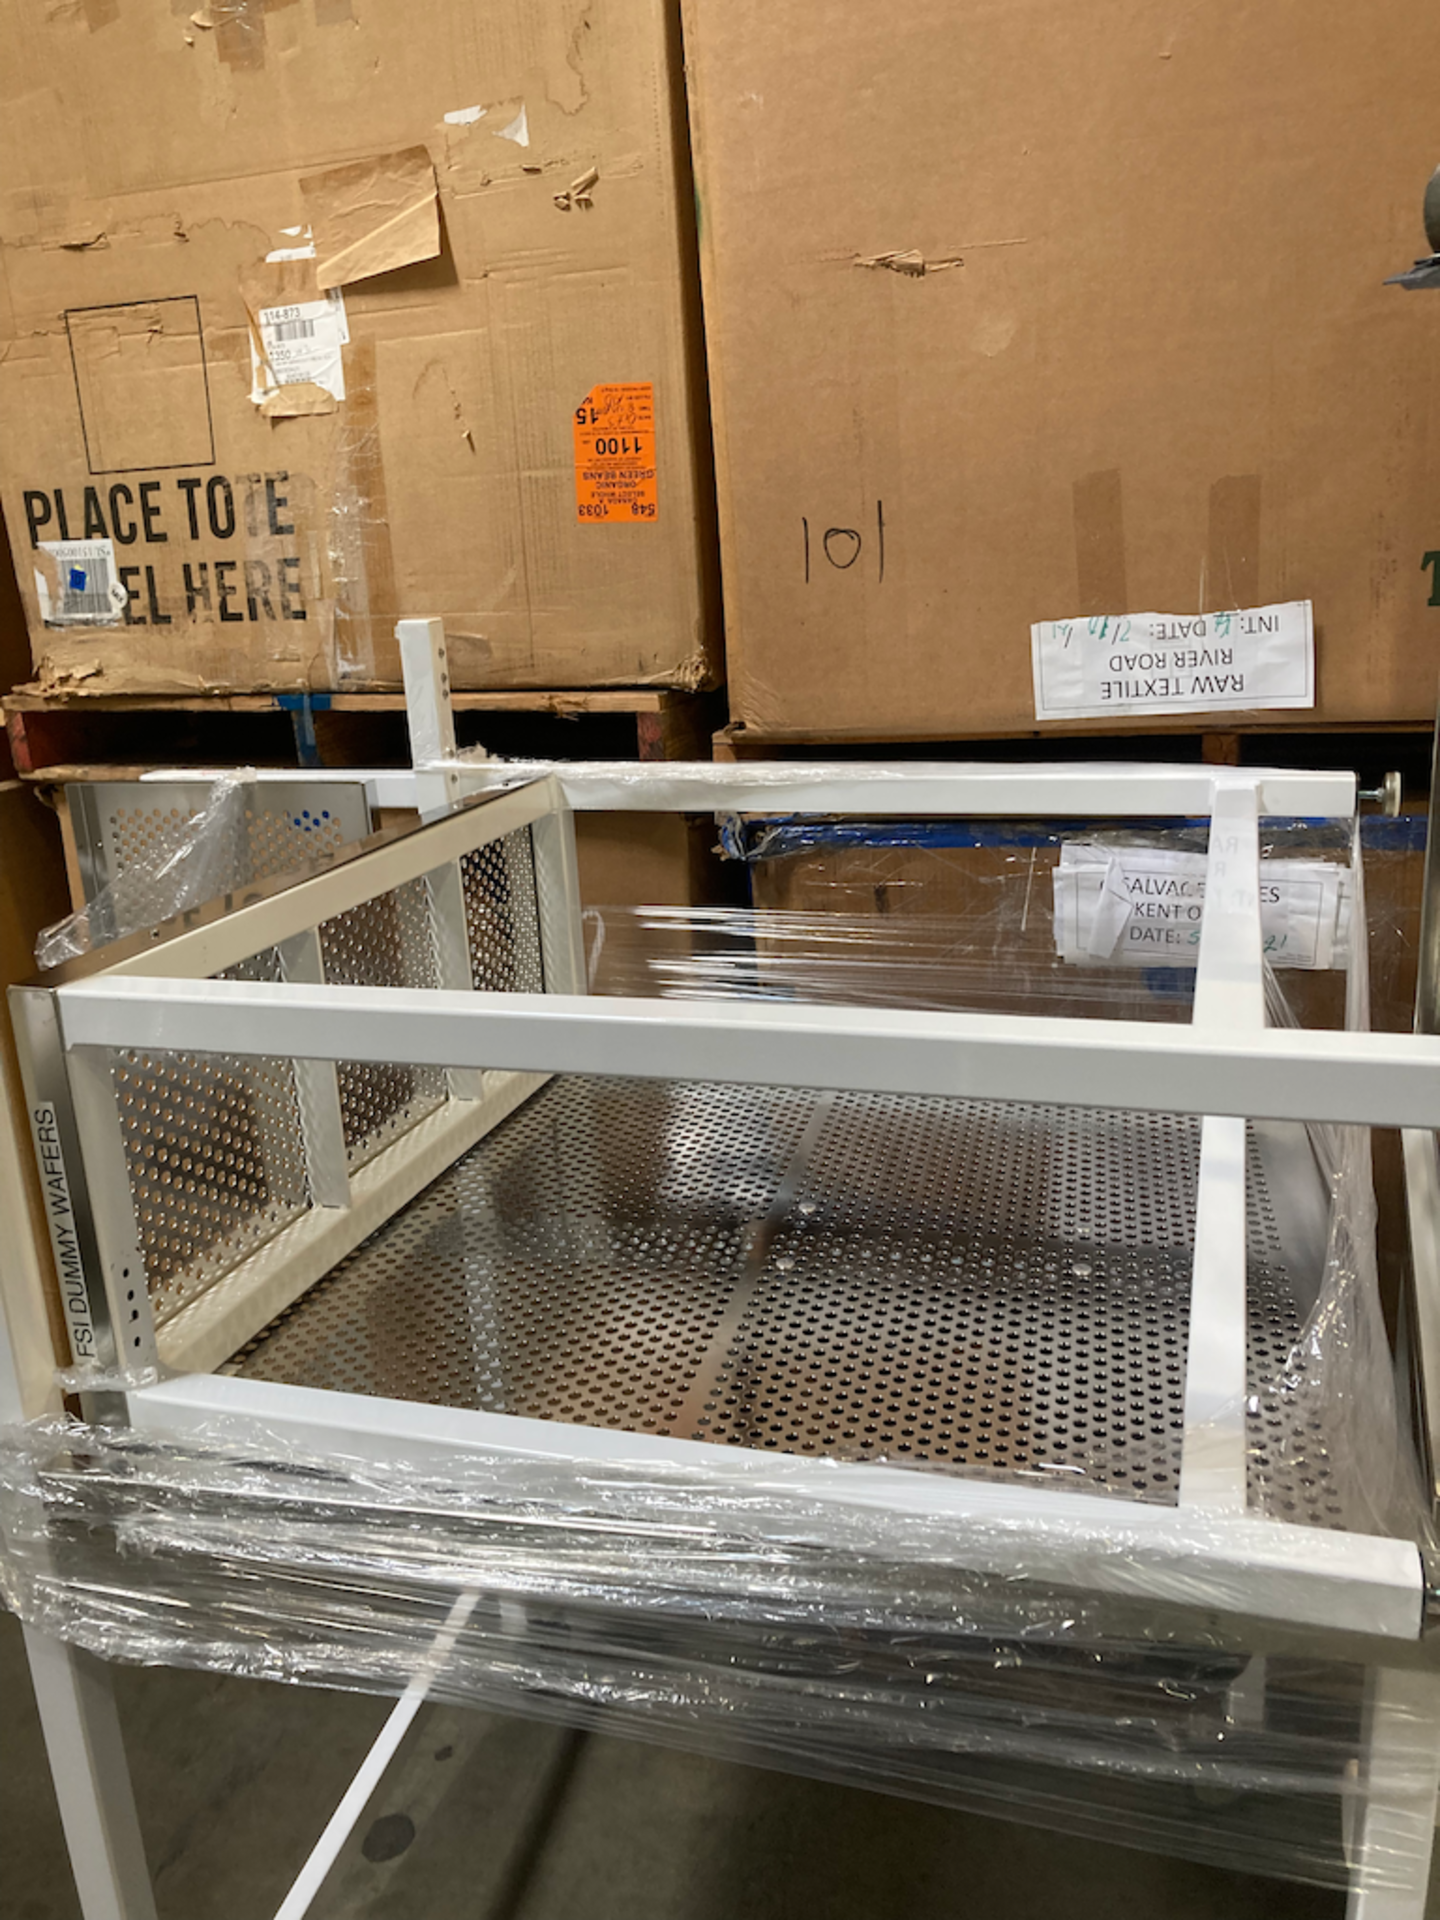 13.5 x 33 x 58 Perforated Stainless Steel Cleanroom Table Top Shelf - Image 2 of 3